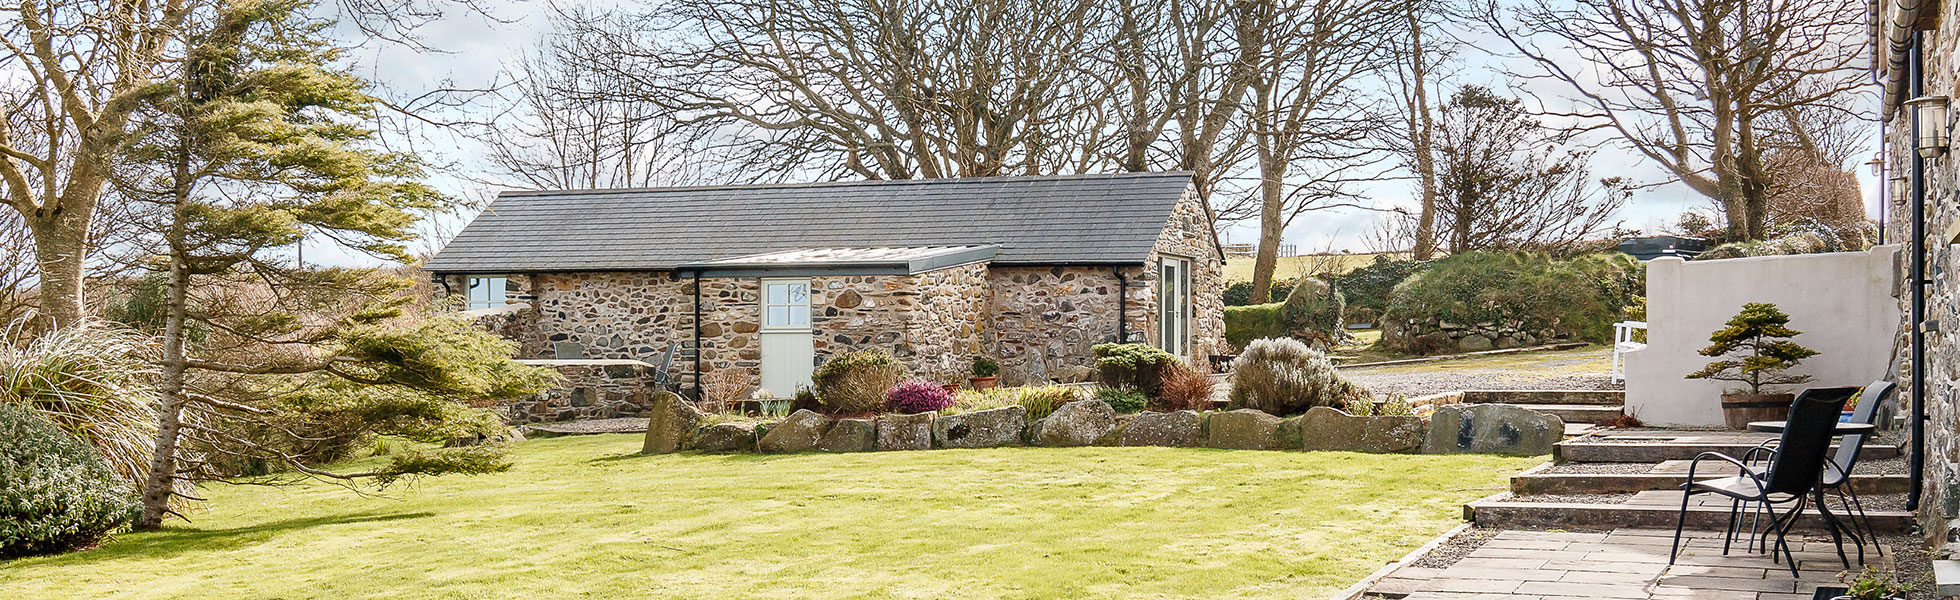 Yr Hafan Self catering and Bed & breakfast cottages